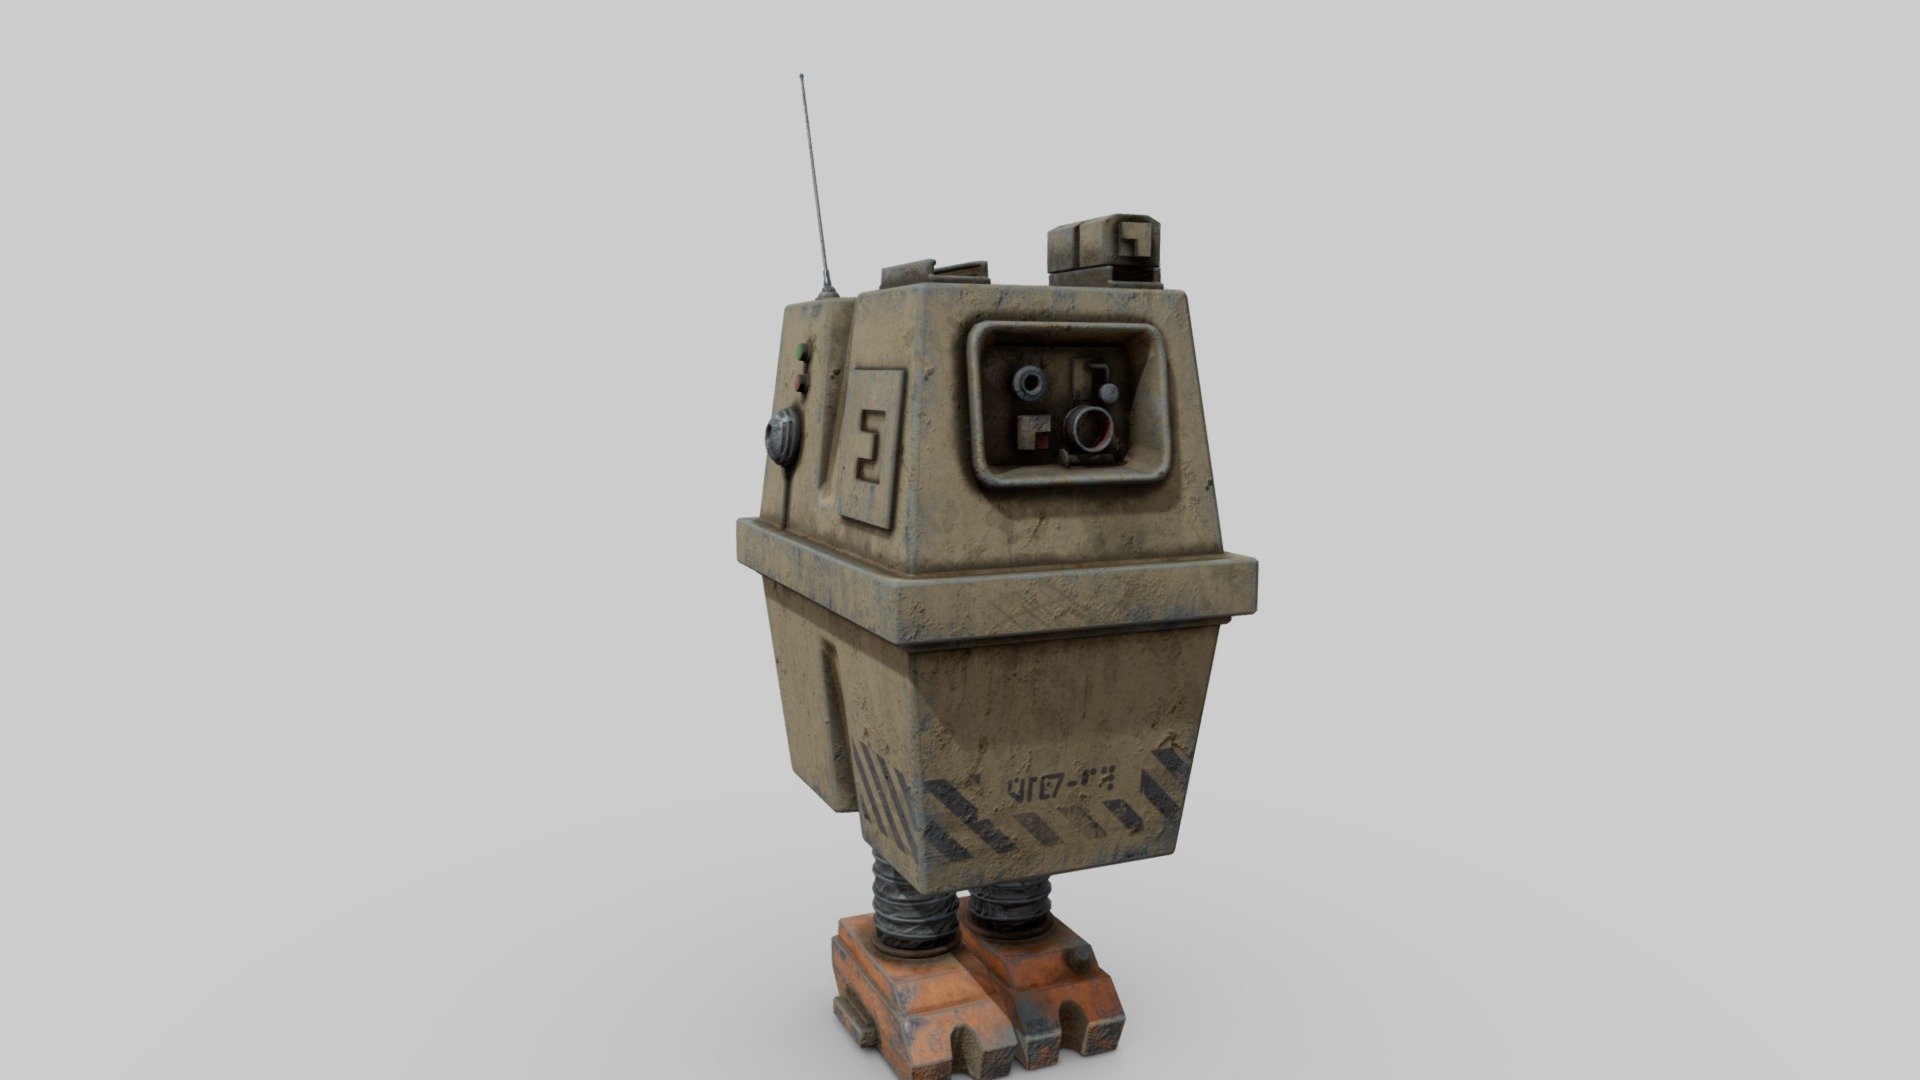 Made a quick gonk droid, I wanted something boxy and easy. Not based on any one specific droid. Textured in Substance Painter, the text says &ldquo;EG-43